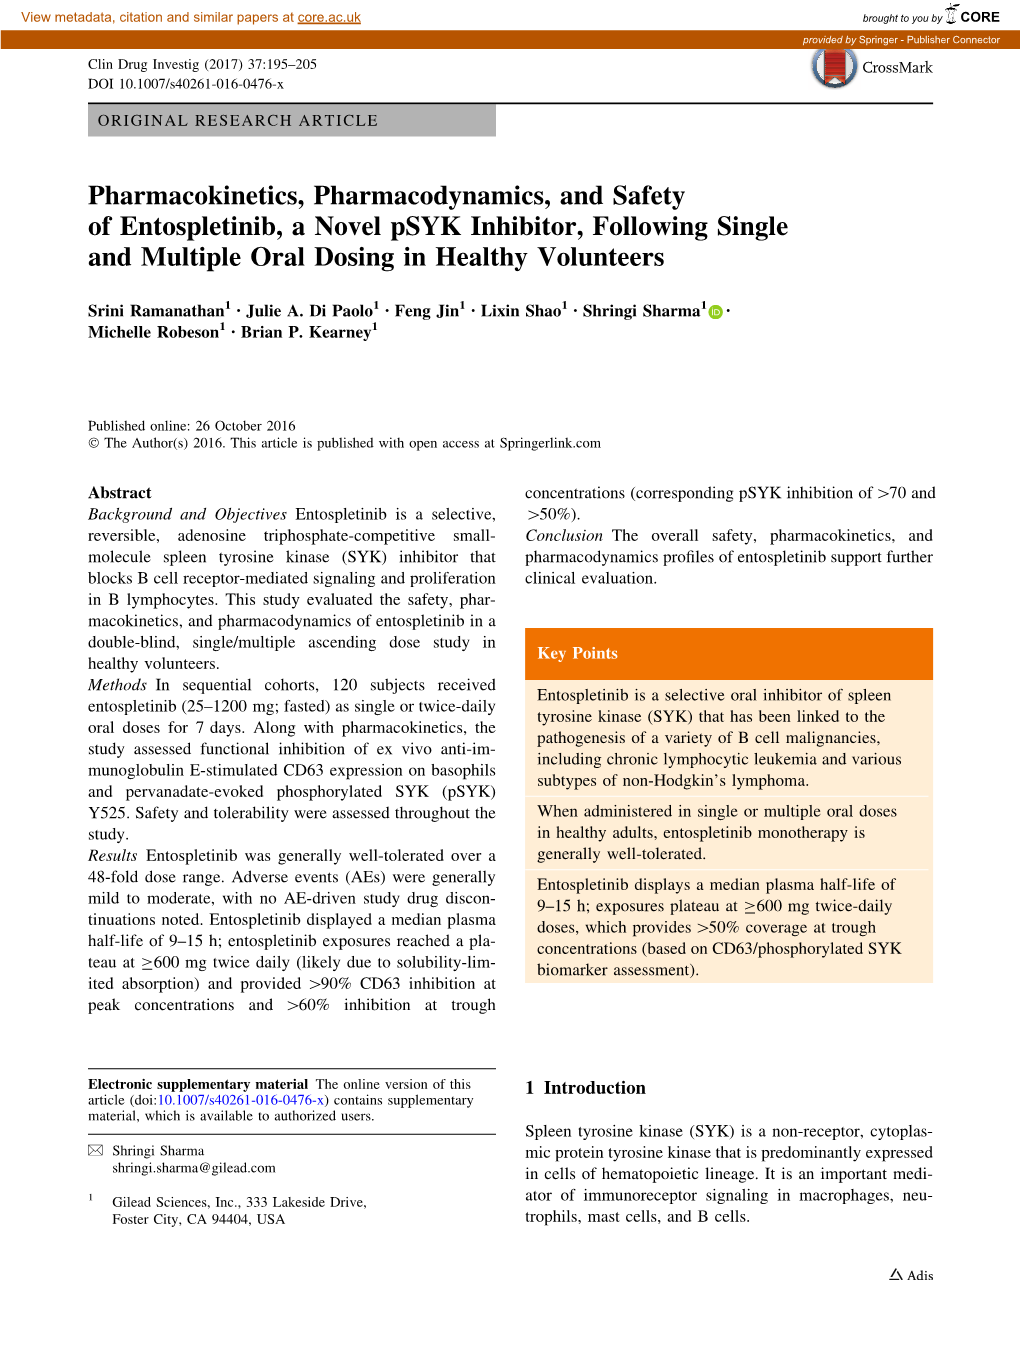 Pharmacokinetics, Pharmacodynamics, and Safety of Entospletinib, a Novel Psyk Inhibitor, Following Single and Multiple Oral Dosing in Healthy Volunteers